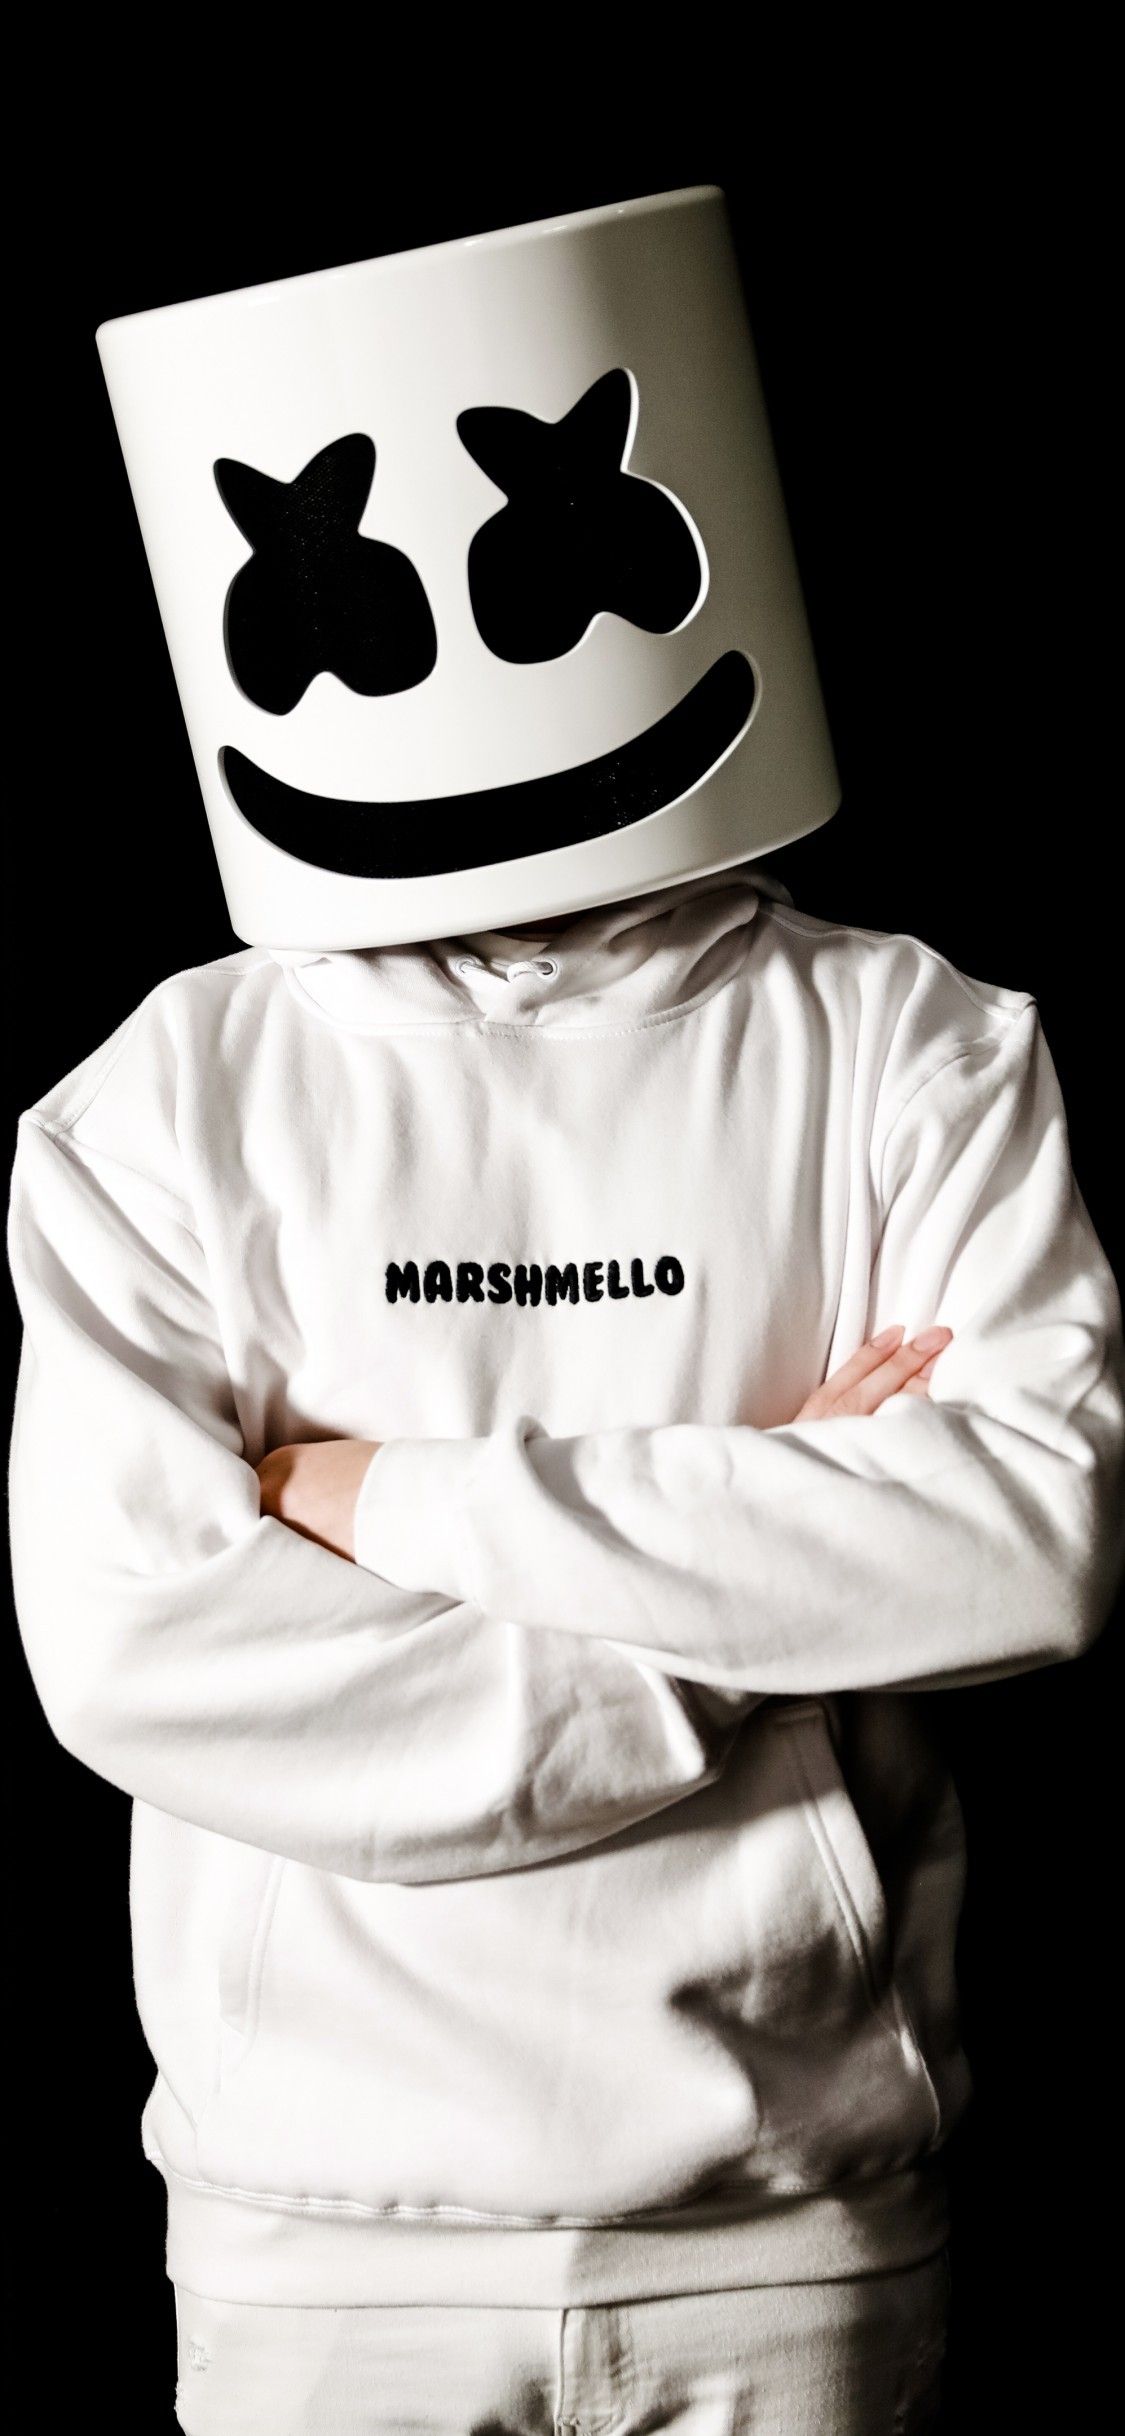 Download 1125x2436 Marshmello, Music Producer, Mask Wallpaper for iPhone 11 Pro & X